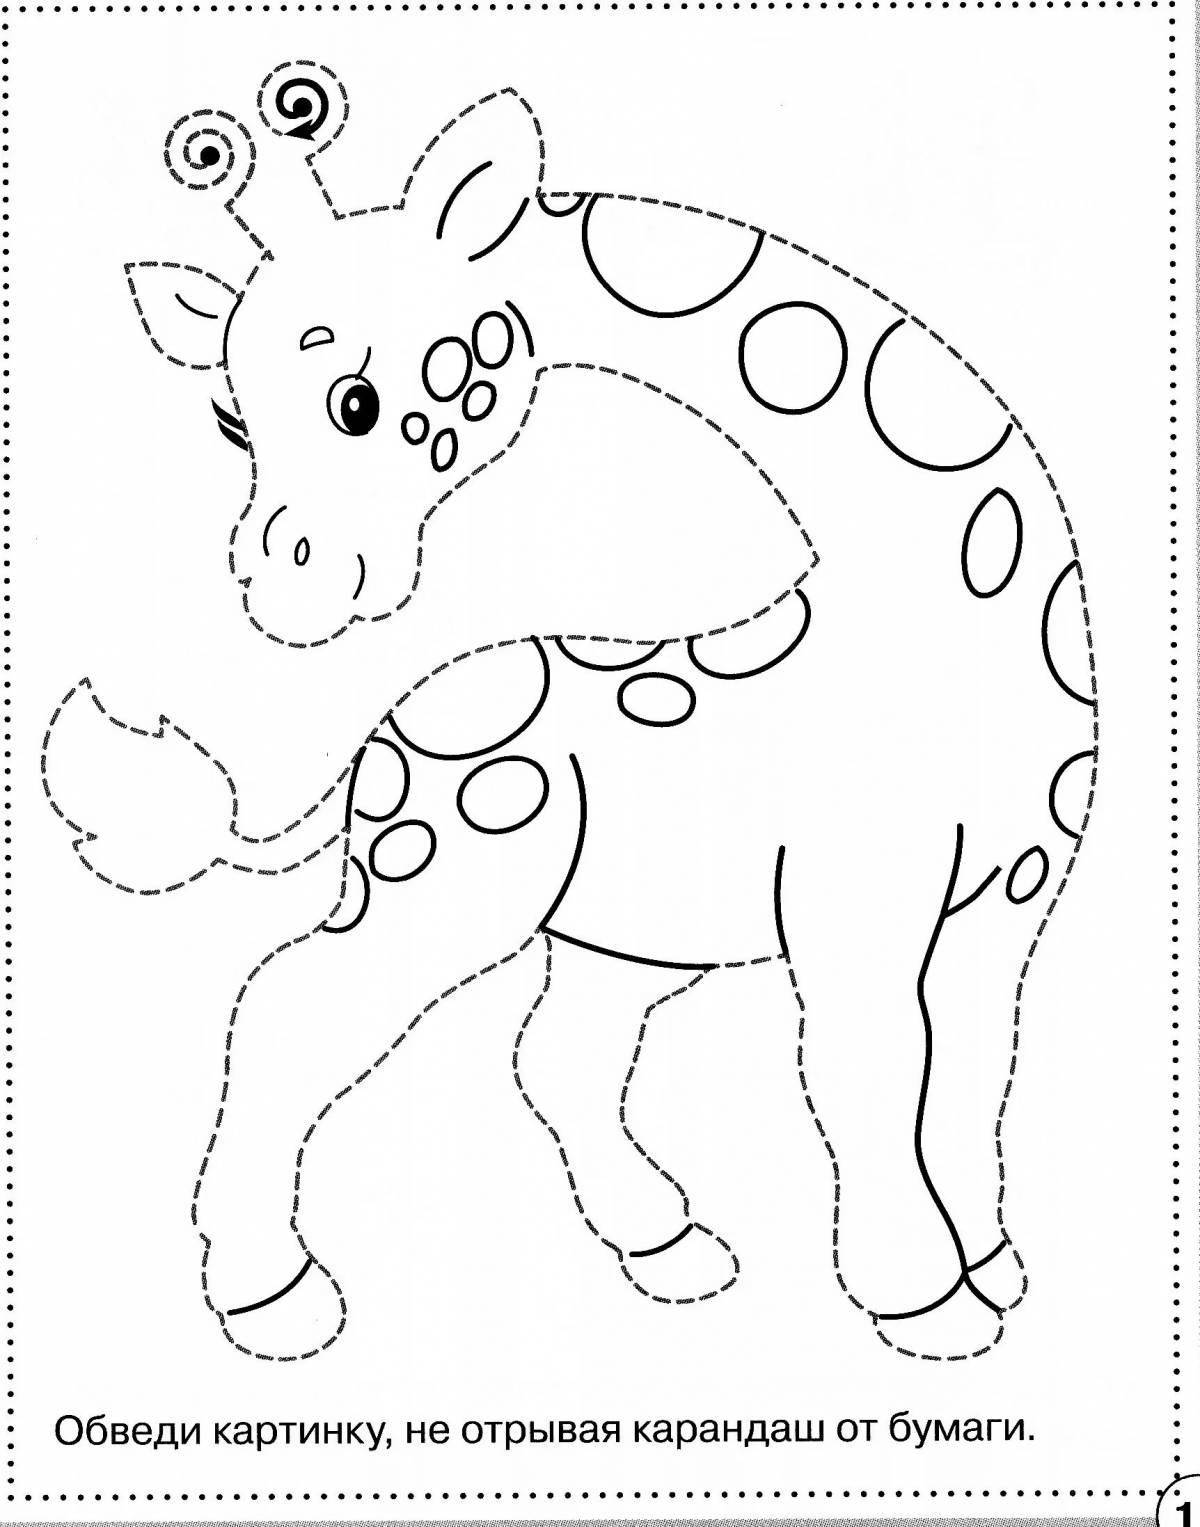 Fabulous coloring pages animals of hot countries for children 5 years old